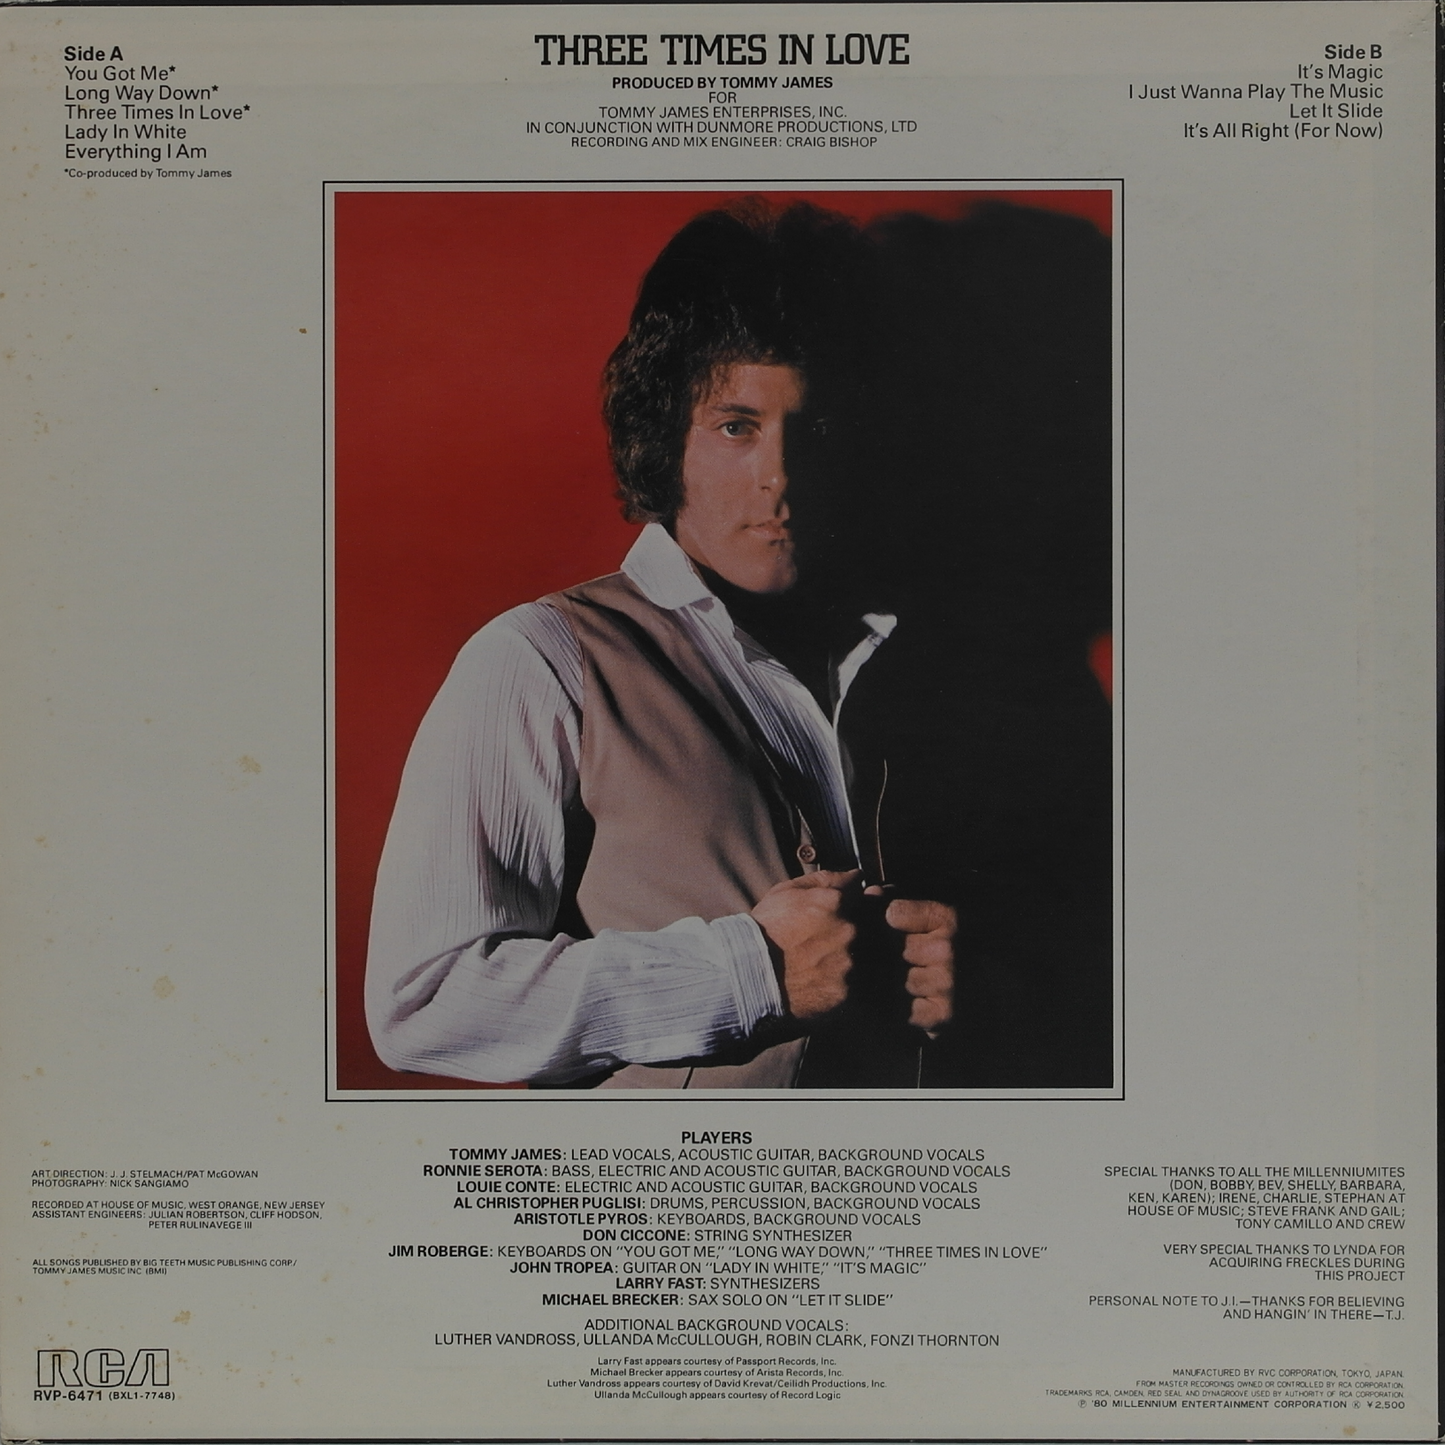 TOMMY JAMES - Three Times In Love